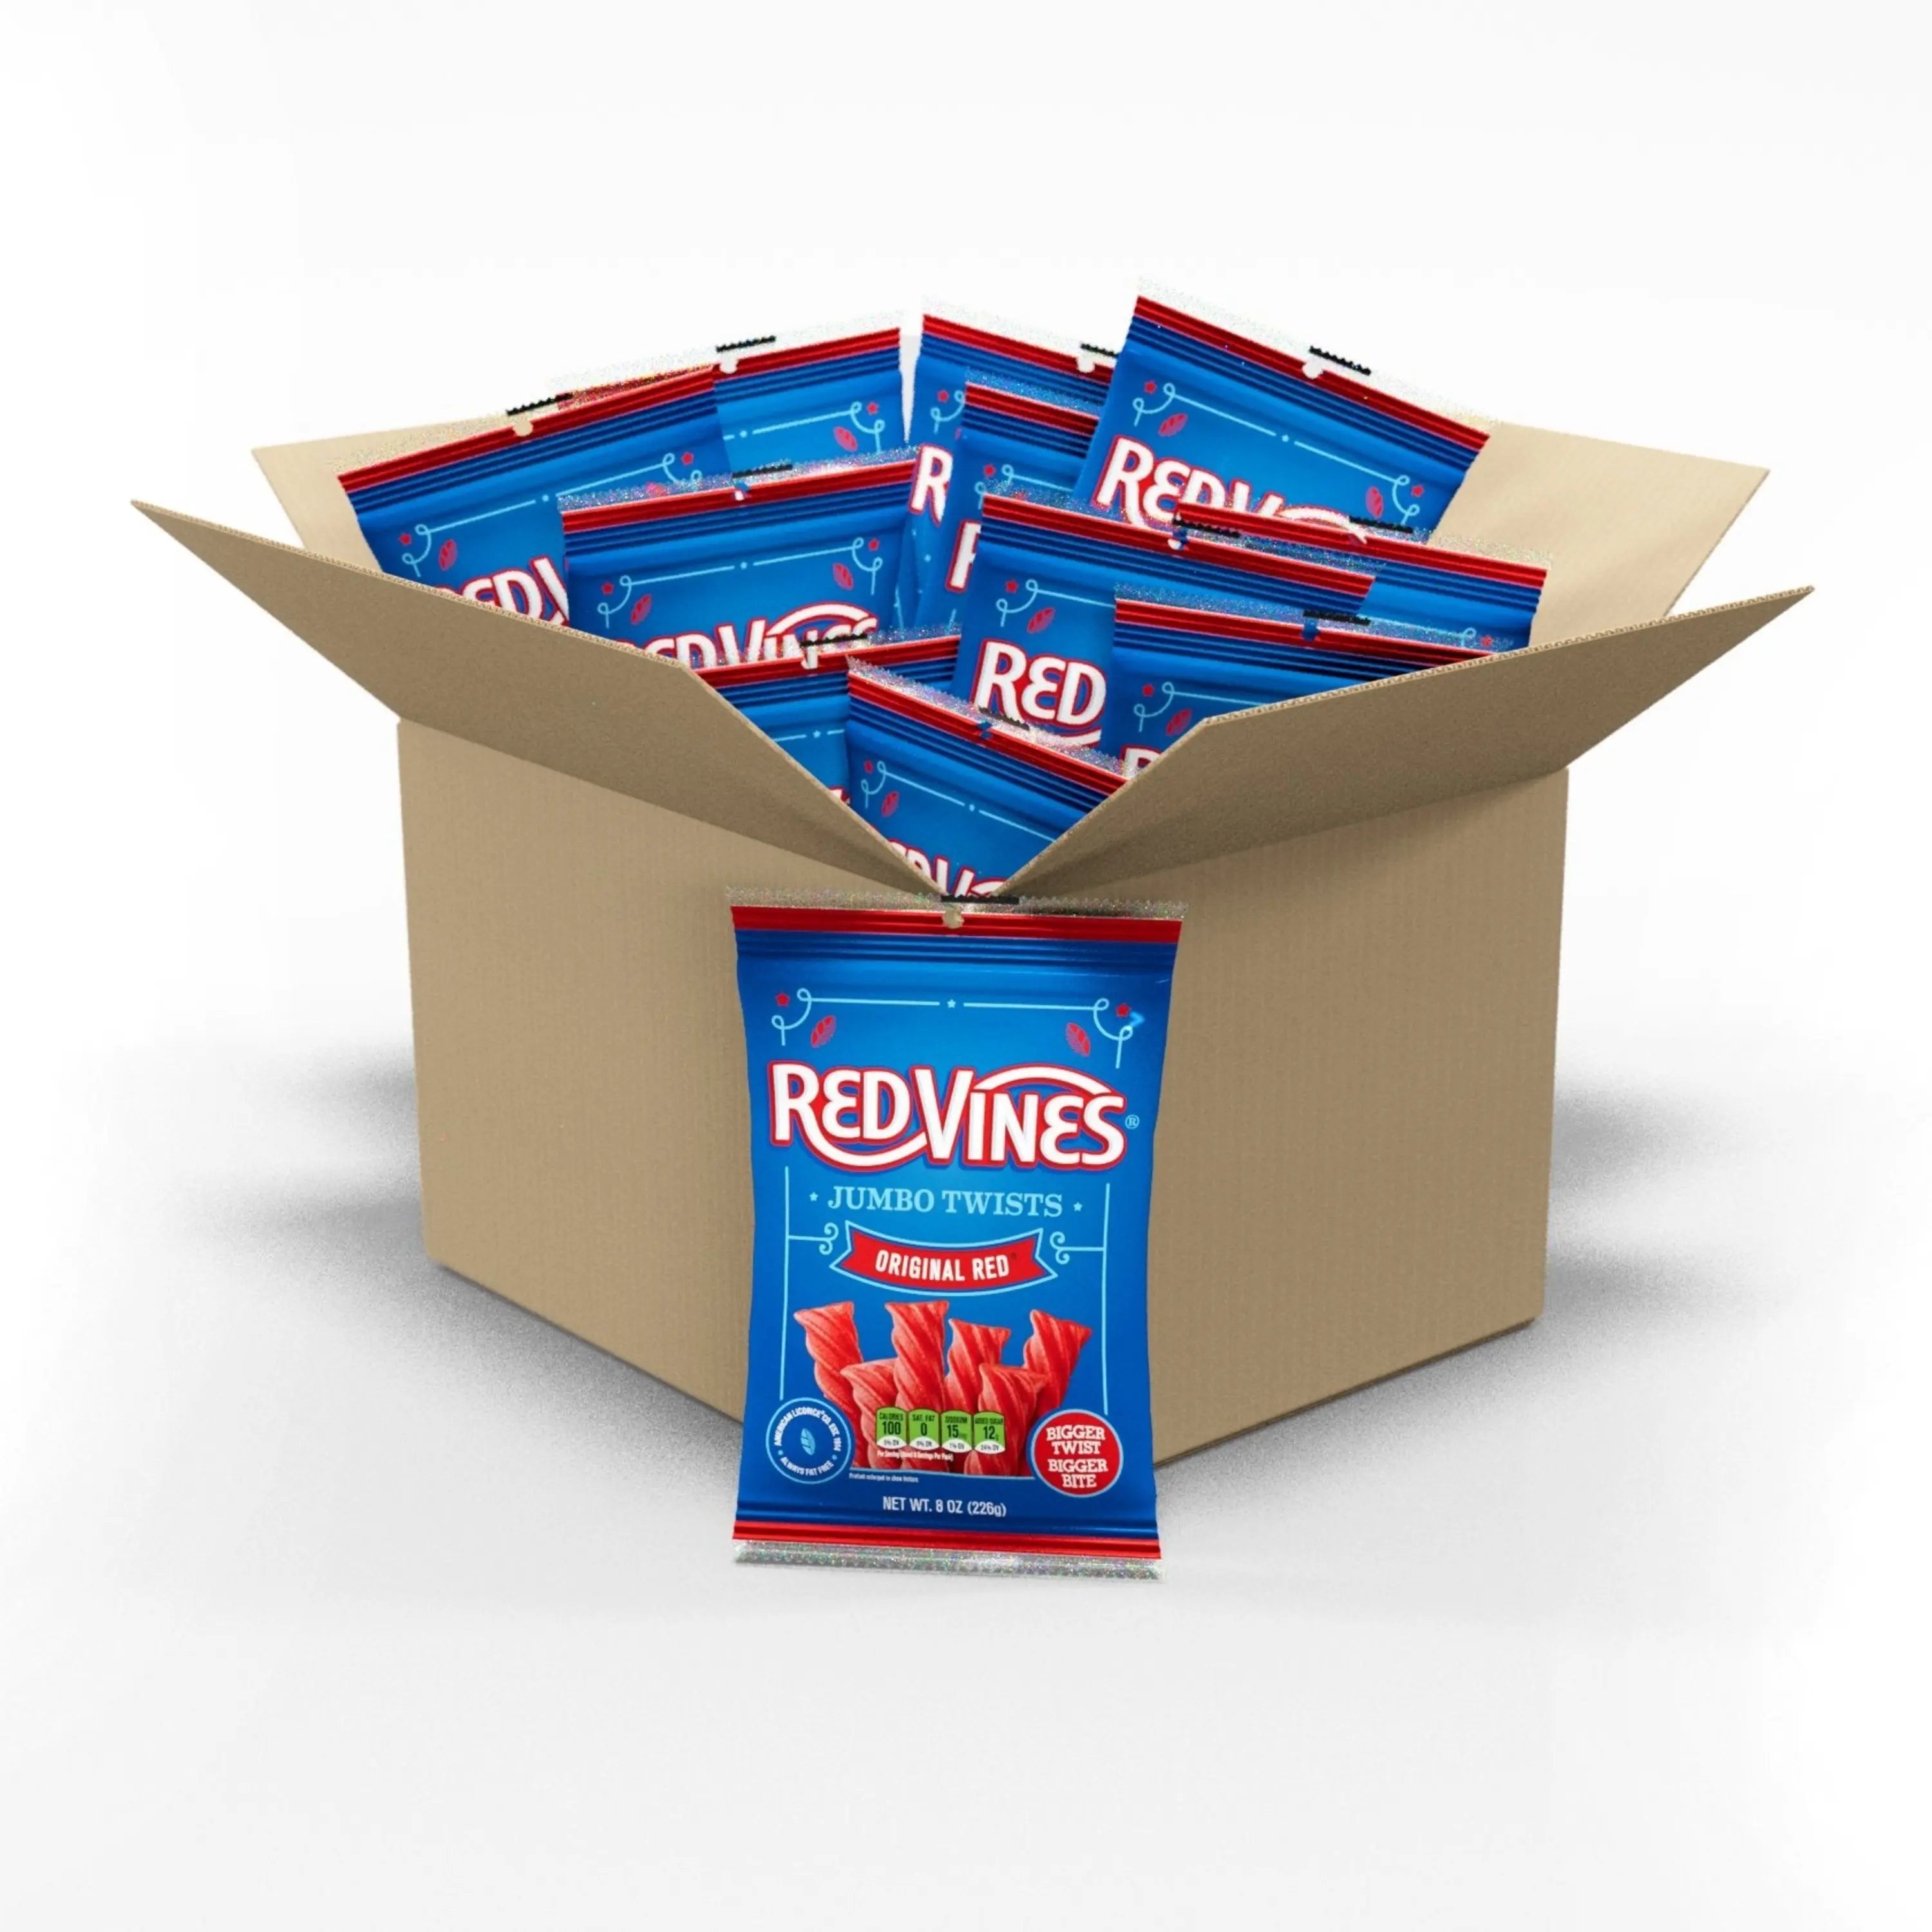 RED VINES Jumbo Original Red Licorice Twists box of 12, 8oz packages